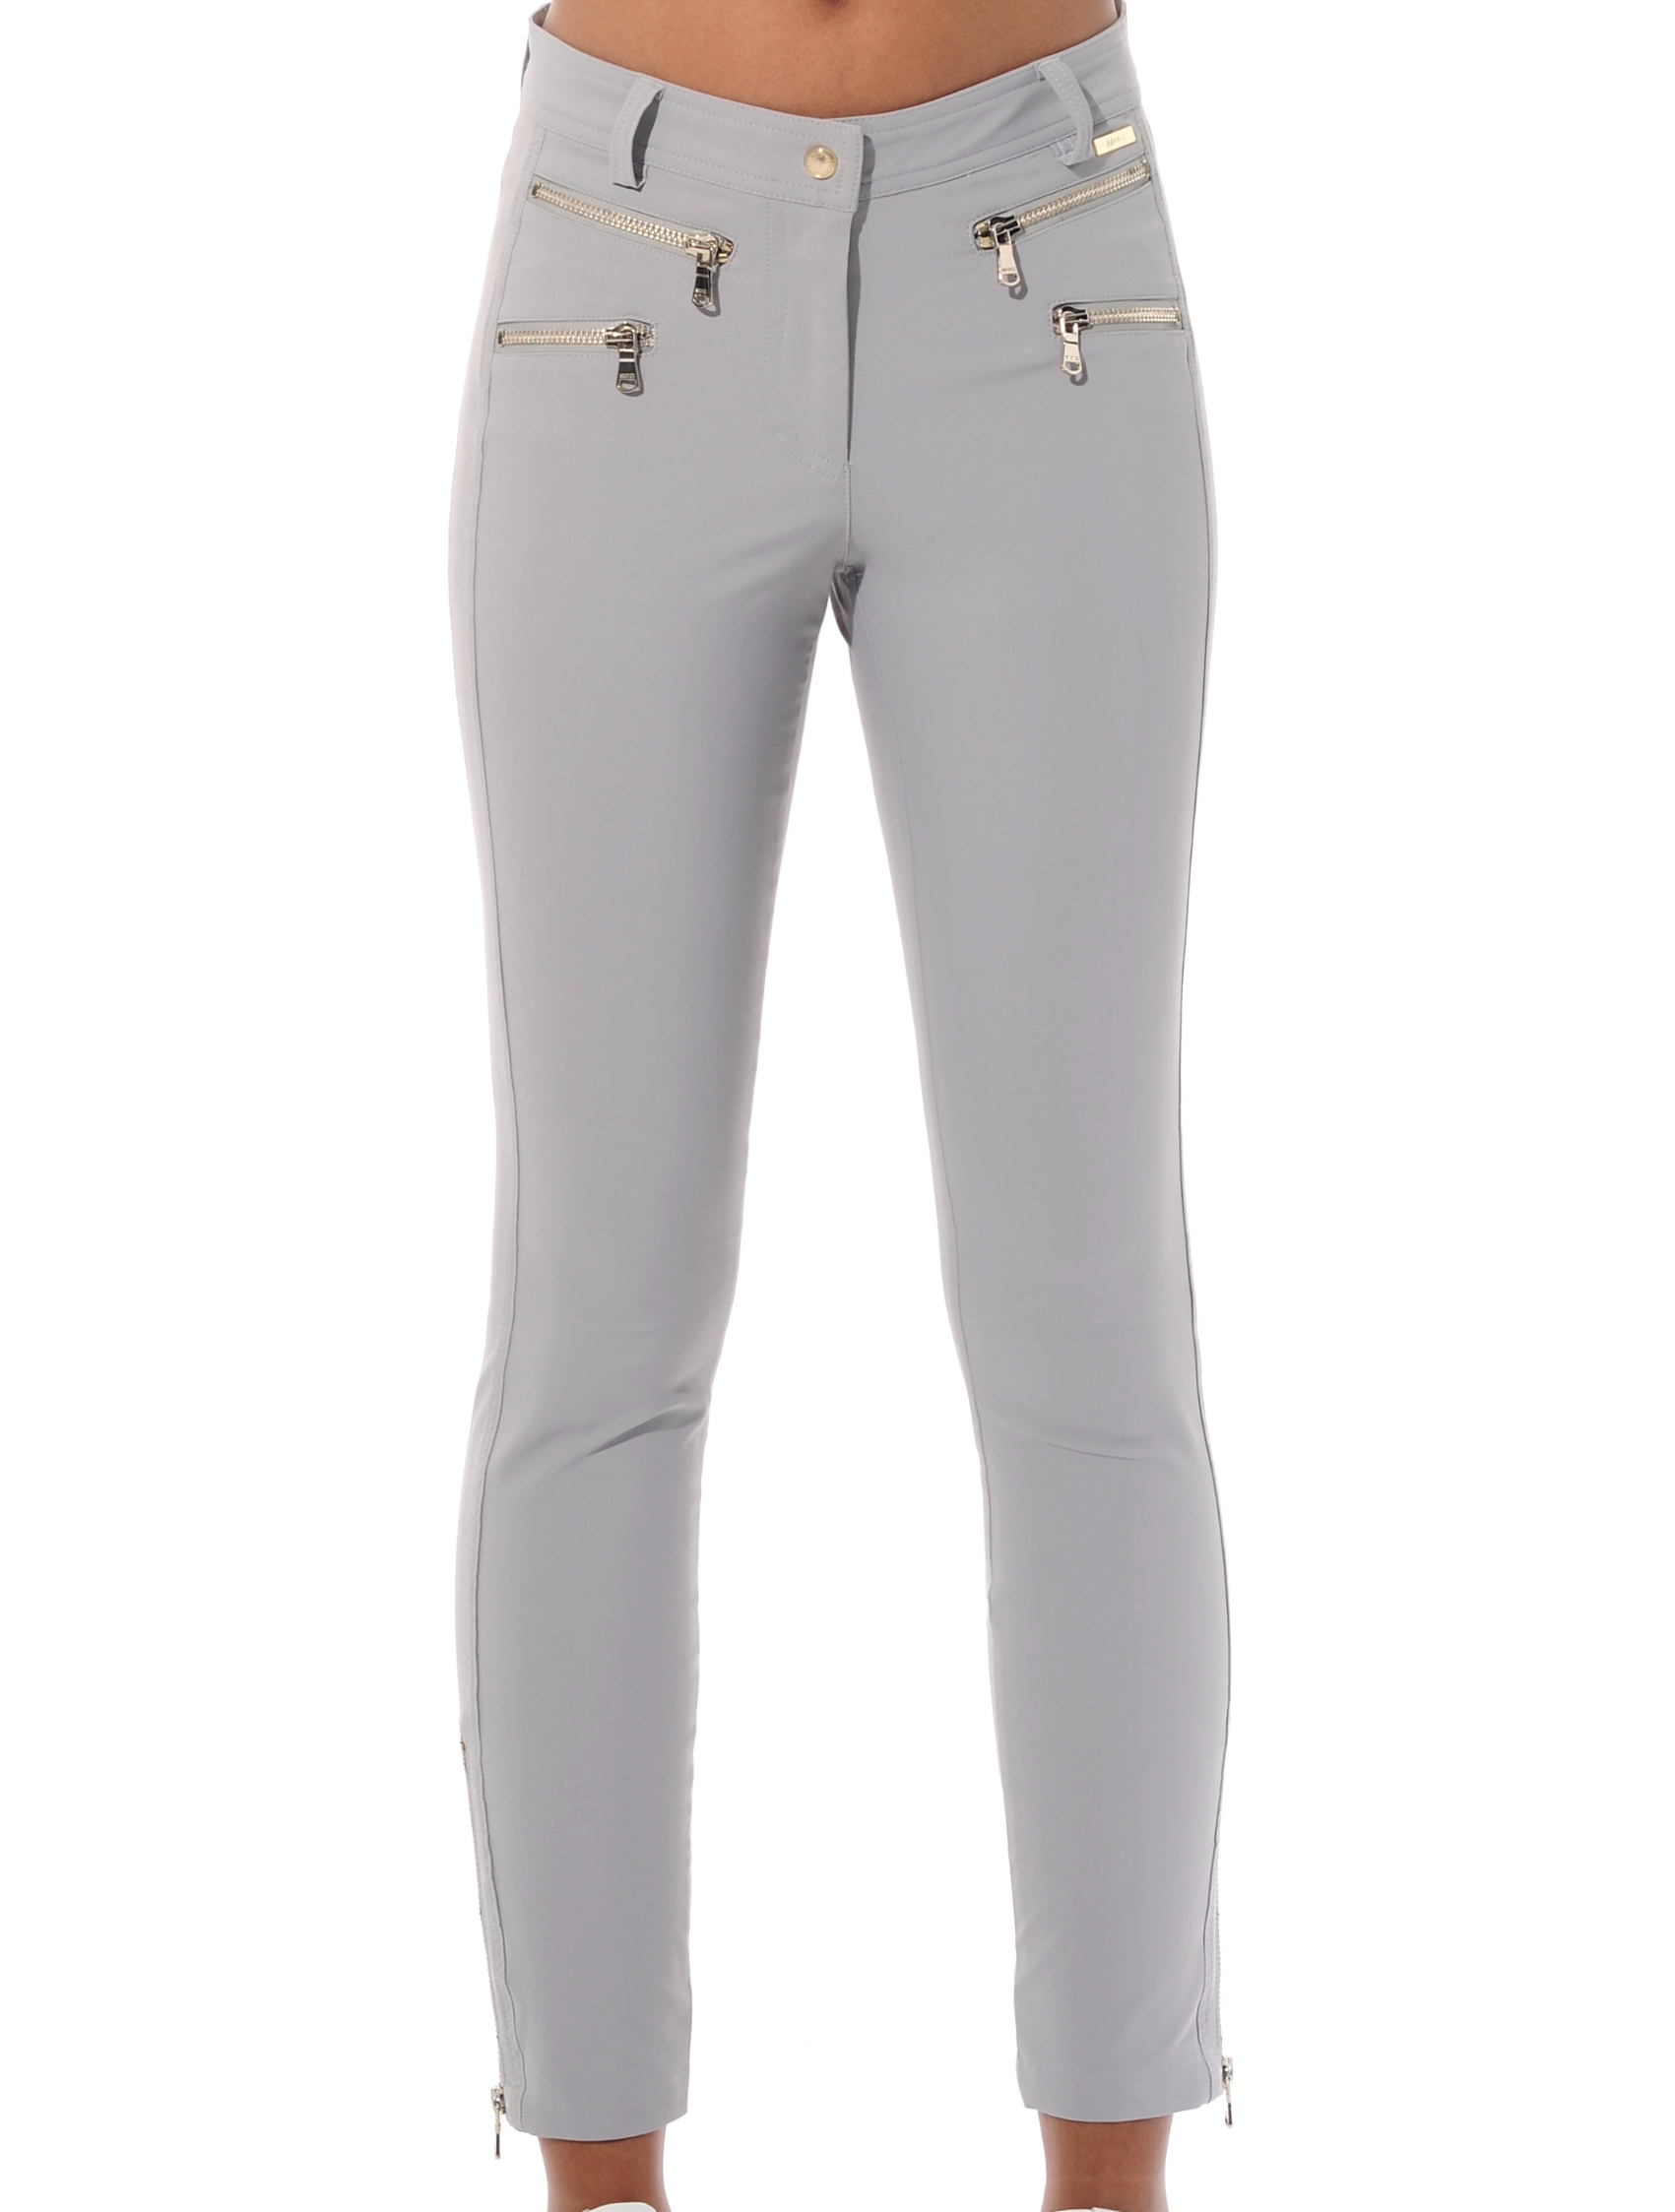 4way stretch double zip ankle pants grey 